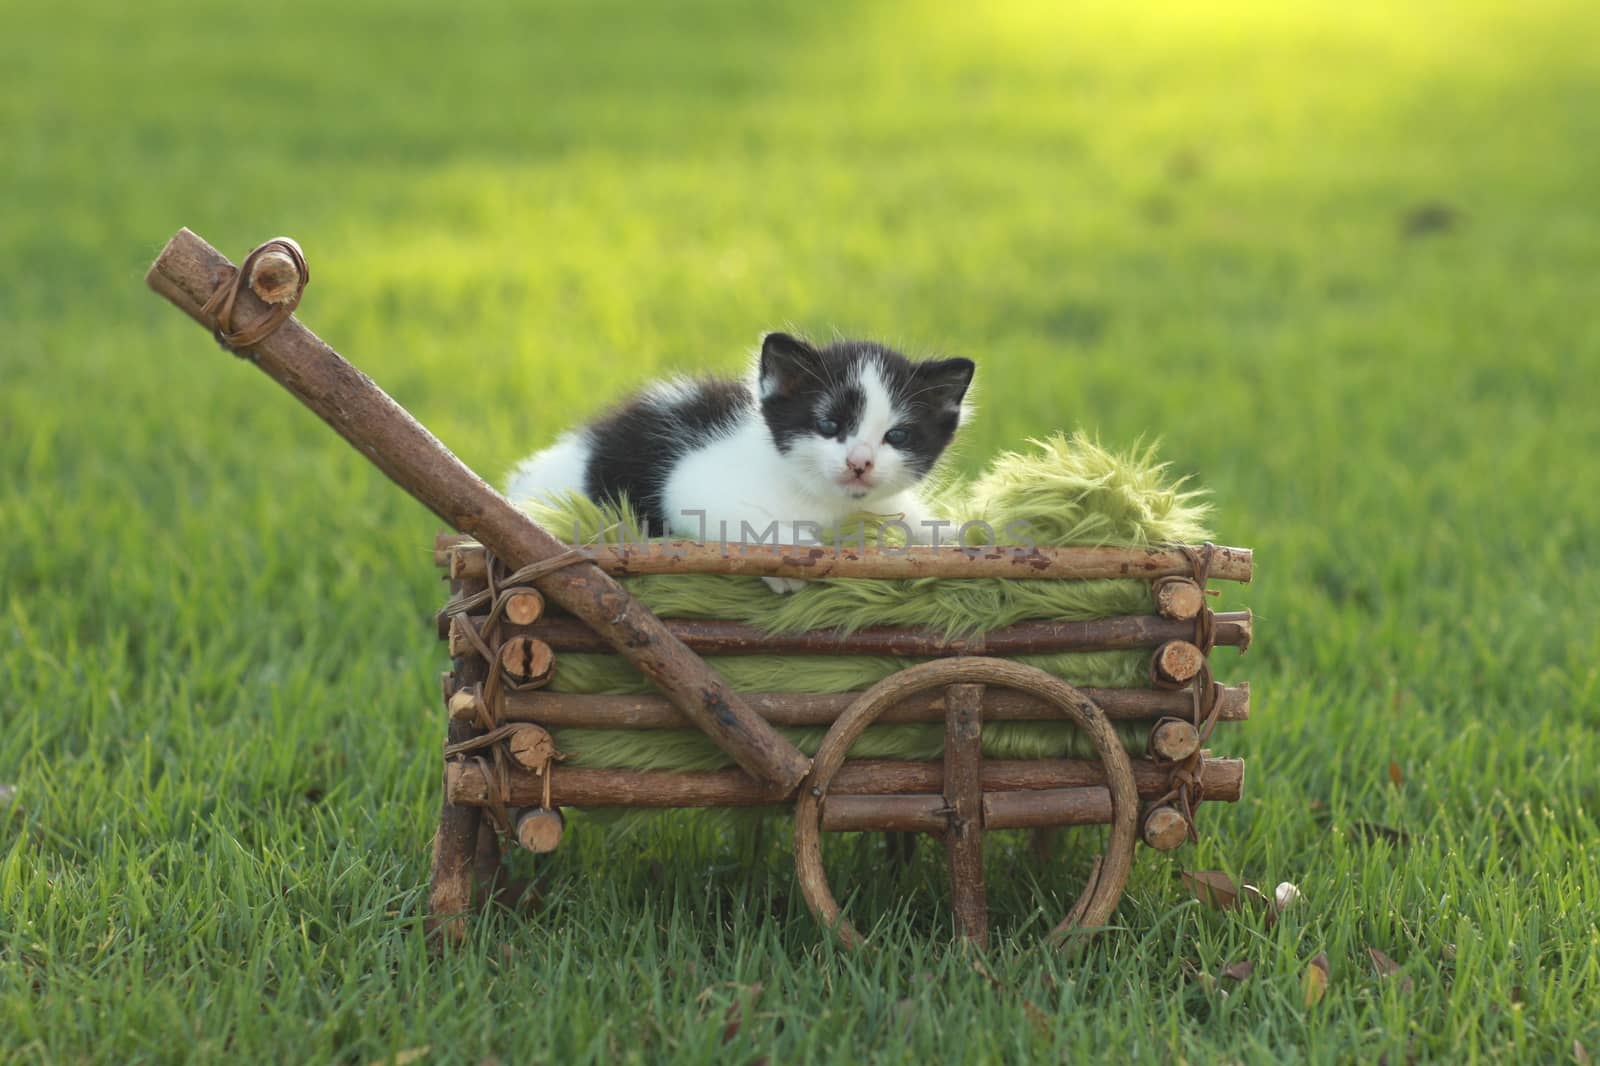 Adorable Black and White Kitten in Basket Outdoors